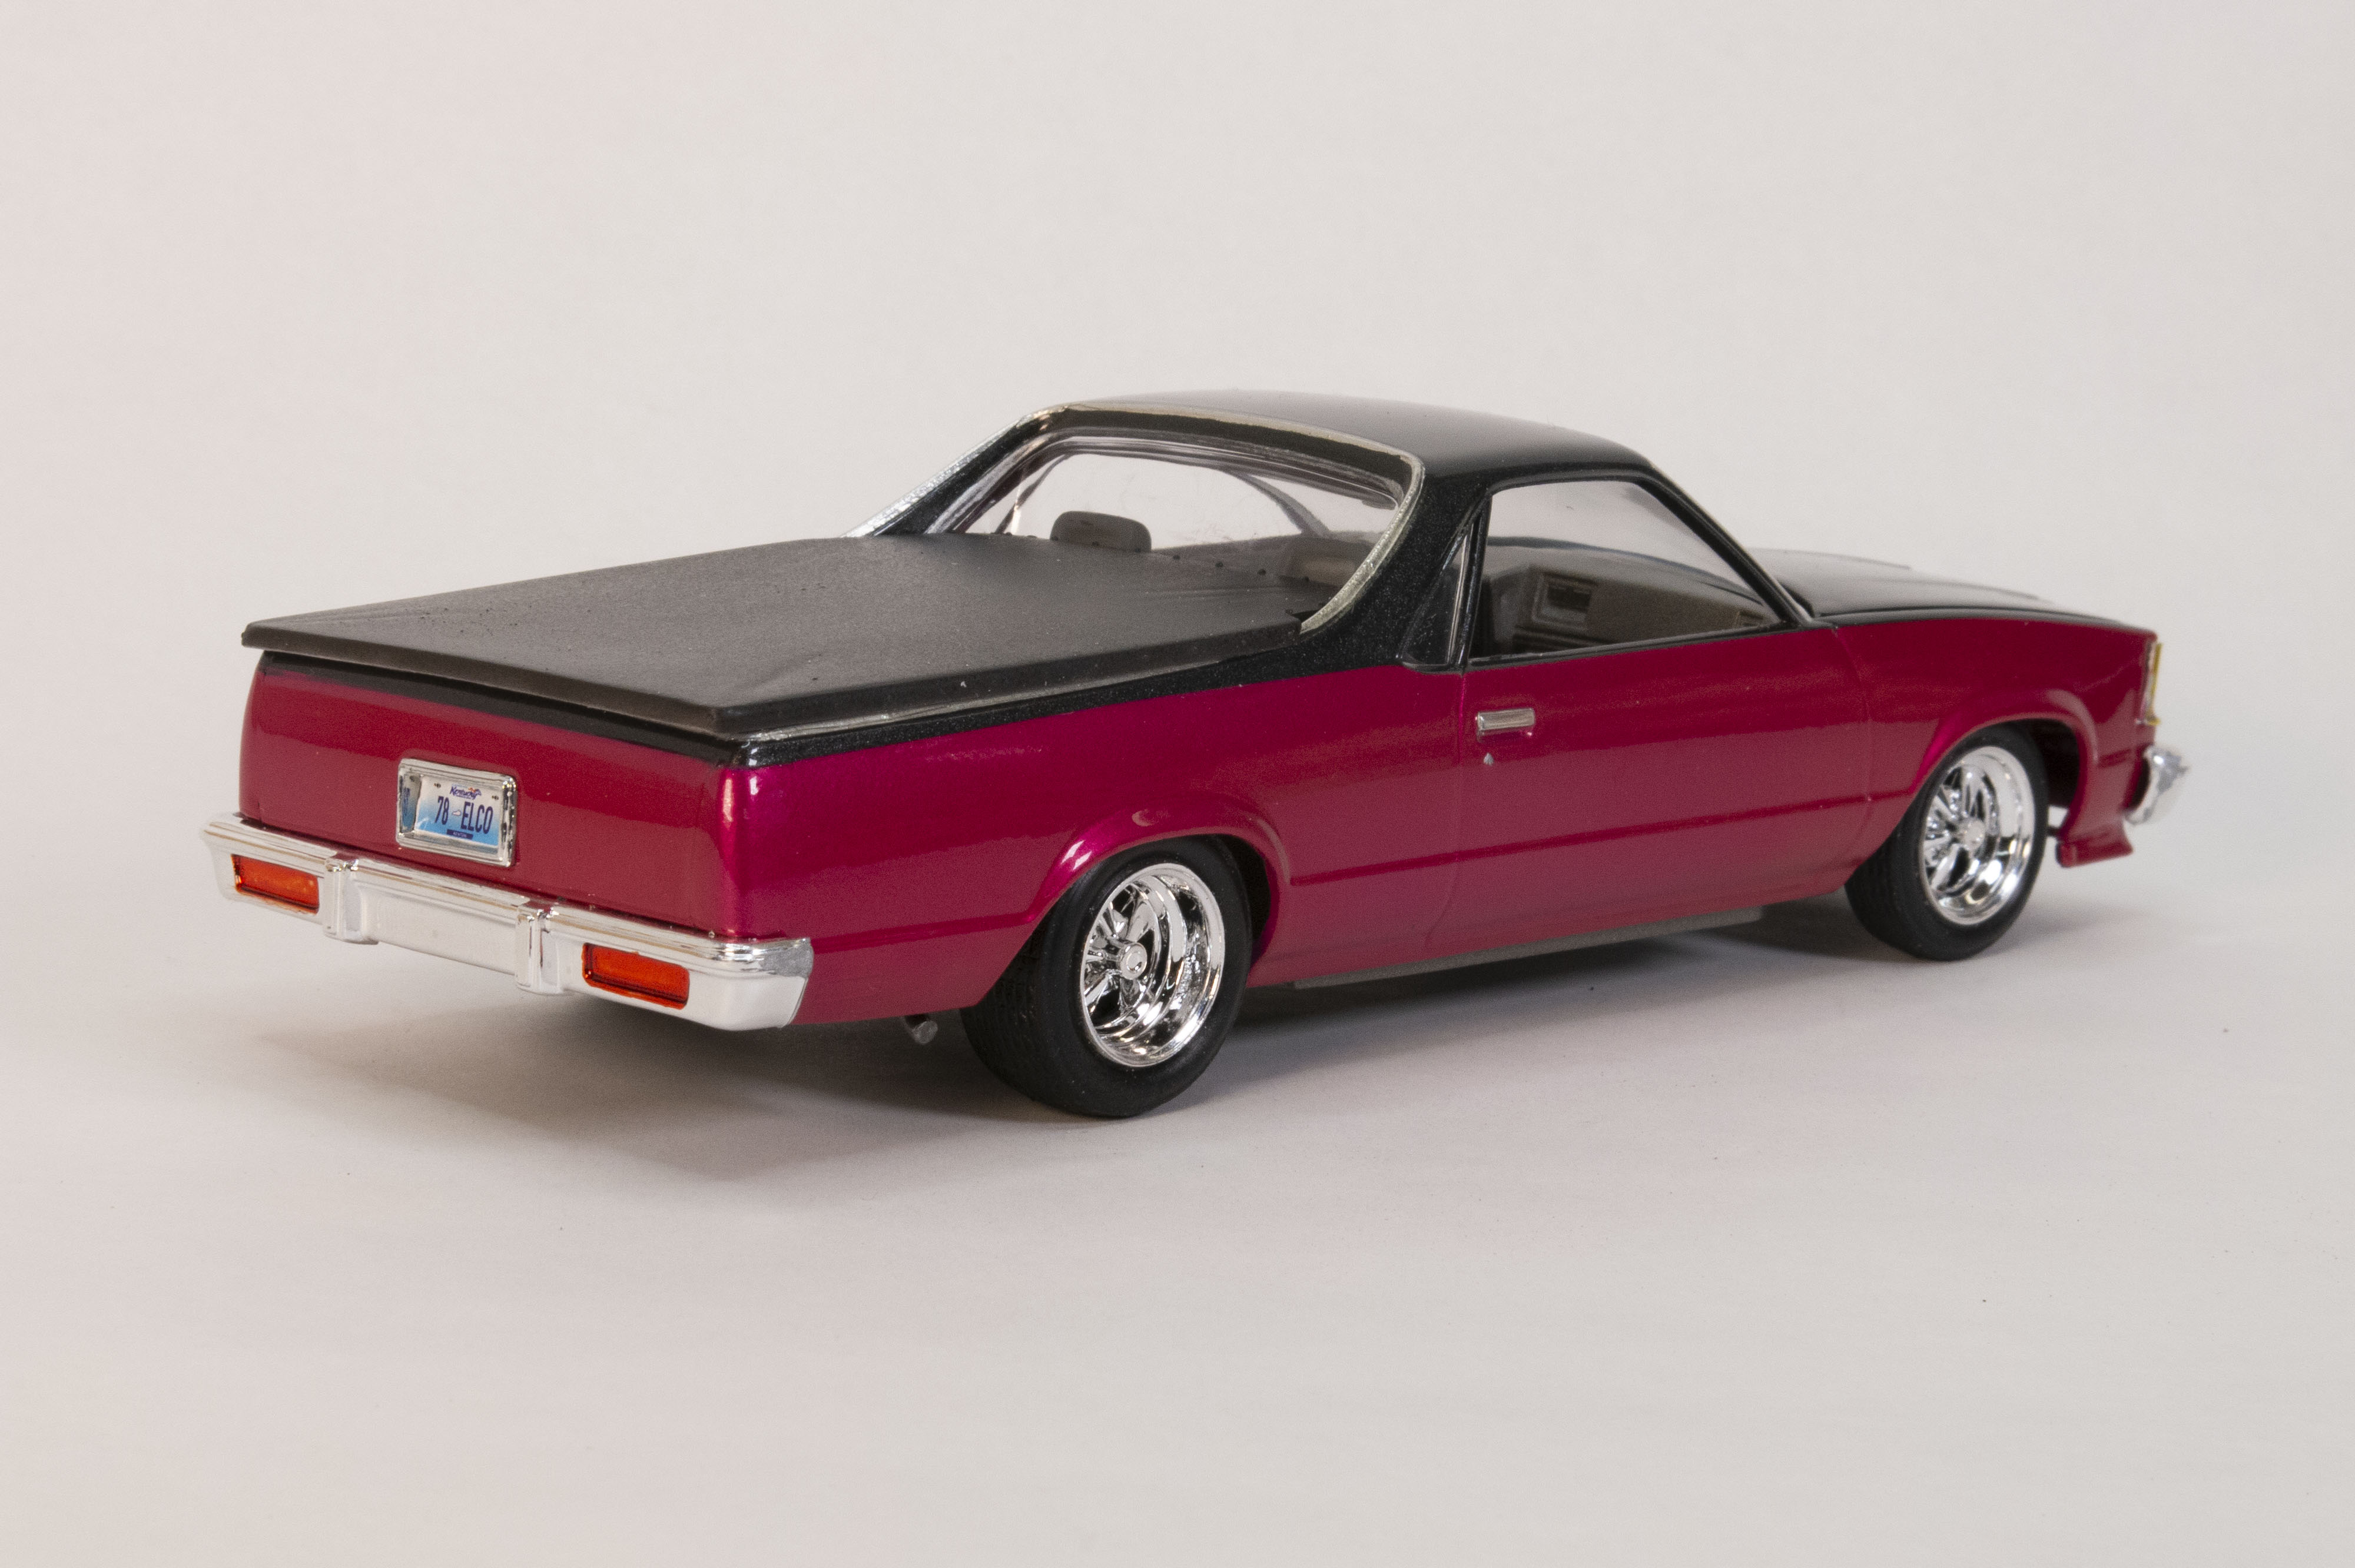 Build review of the Revell Monogram 1978 Chevy El Camino 3 'n 1 